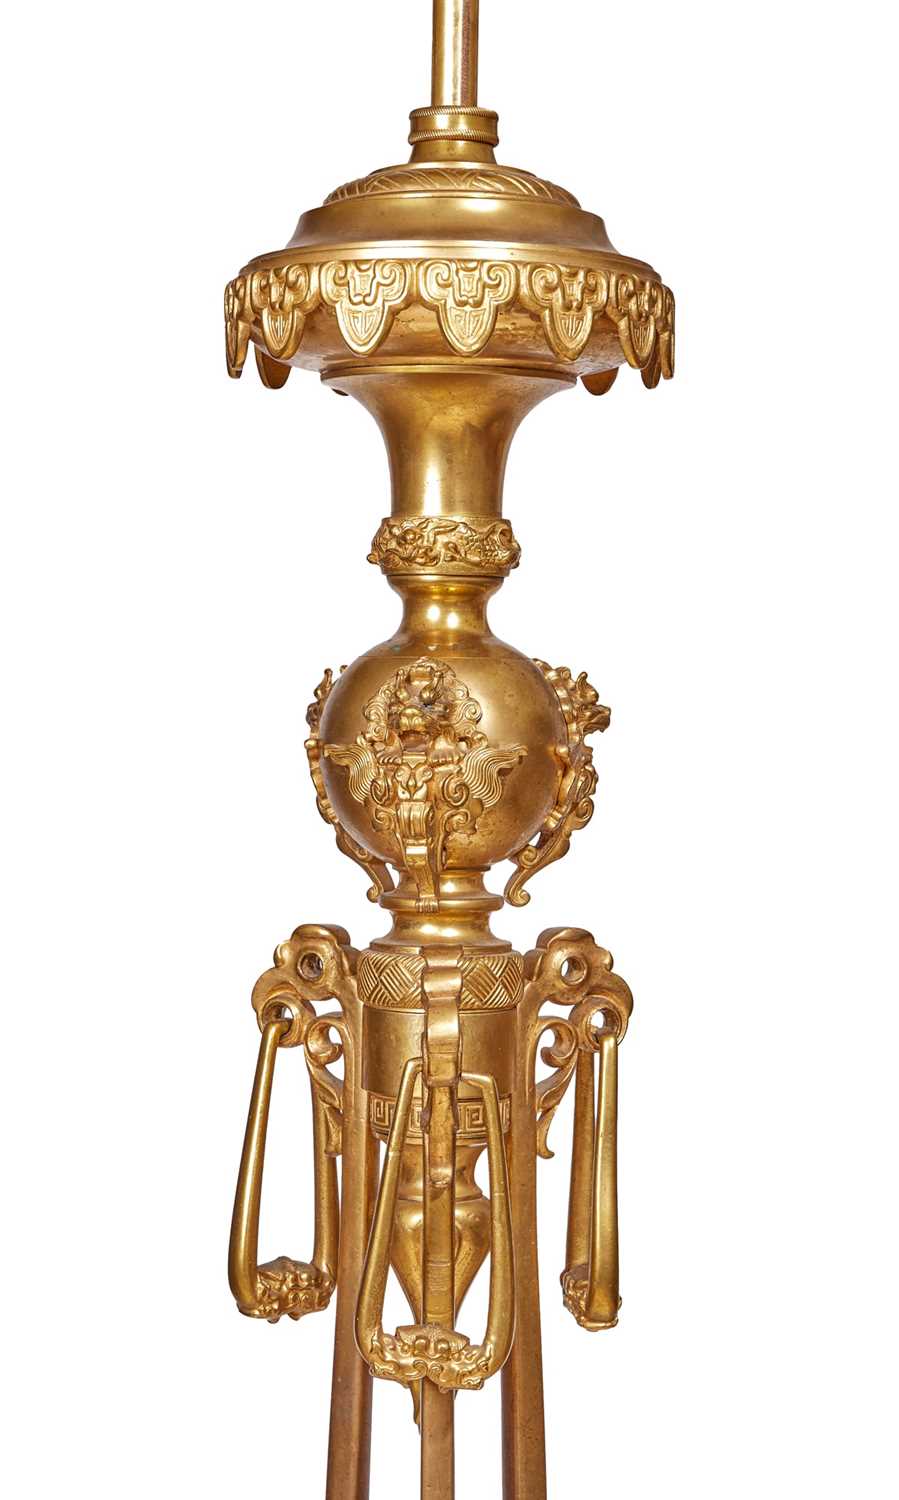 ATTRIBUTED TO EDOUARD LIEVRE: A FINE 19TH CENTURY GILT BRONZE FLOOR STANDING LAMP - Image 3 of 5